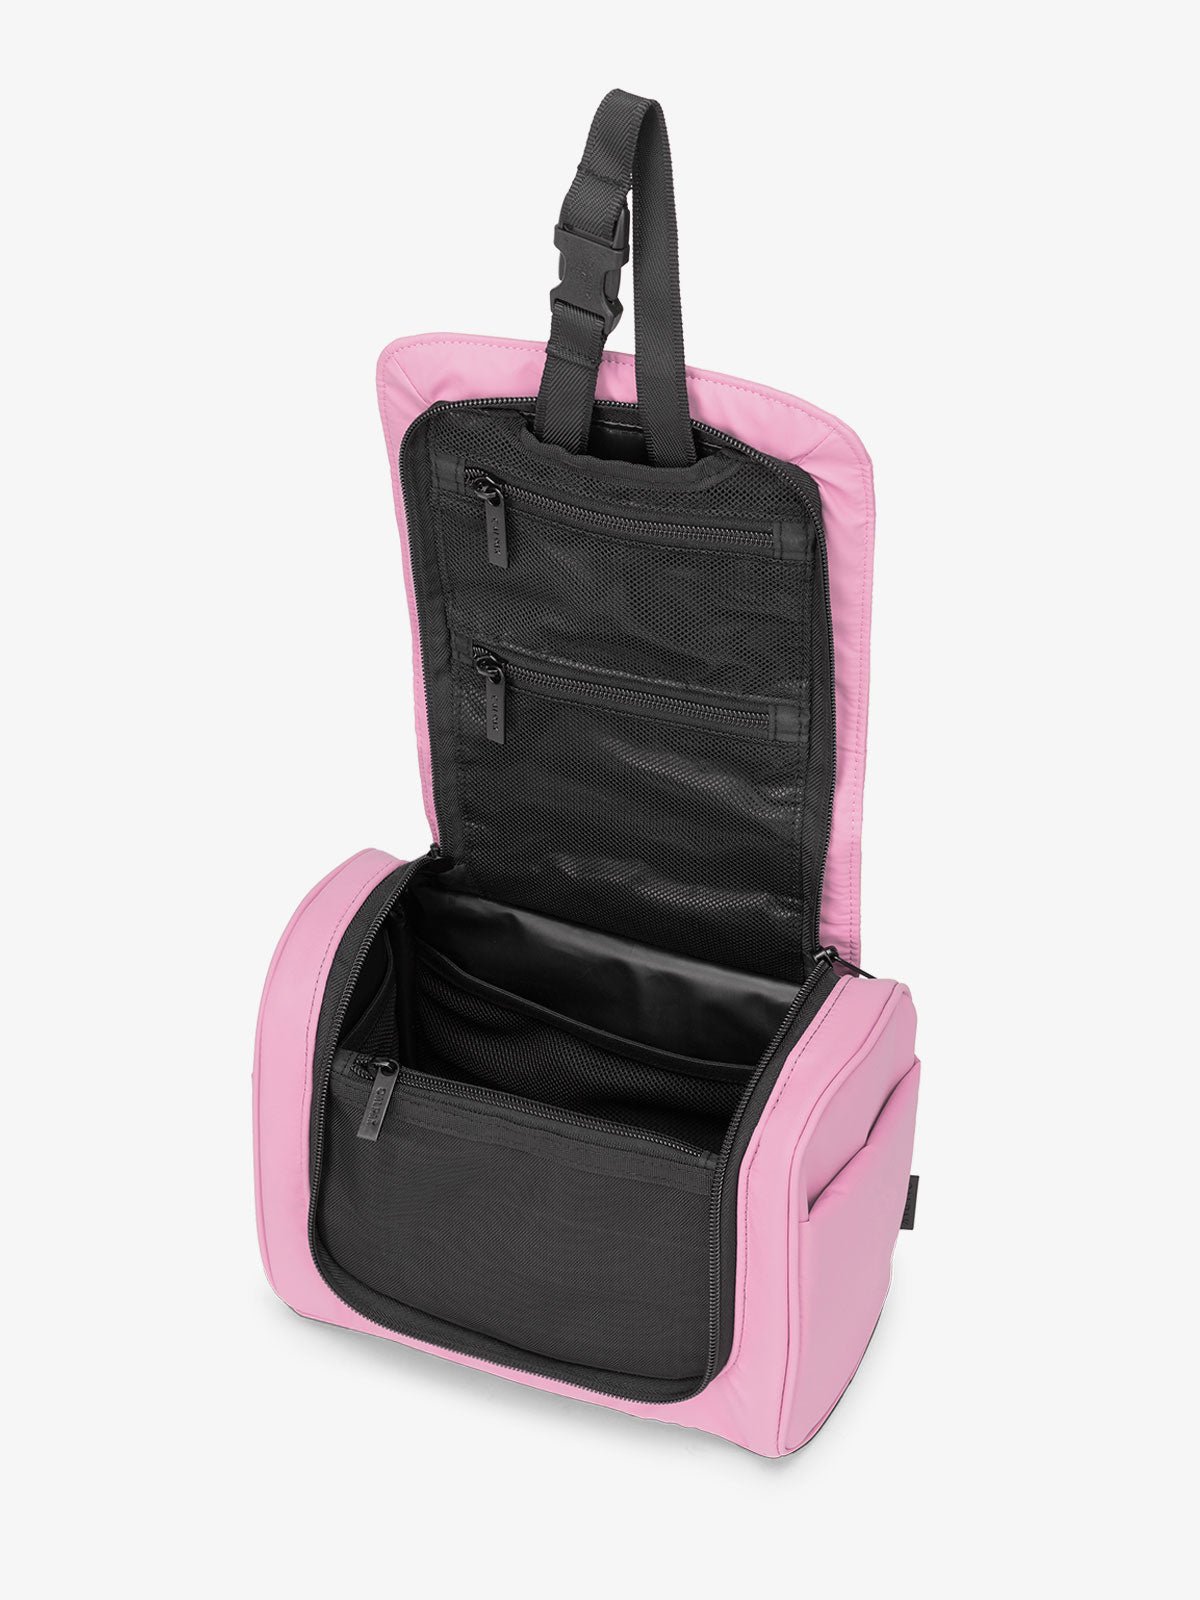 Luka Hanging Toiletry Bag with multiple interior pockets and retractable hanging strap in bubblegum pink